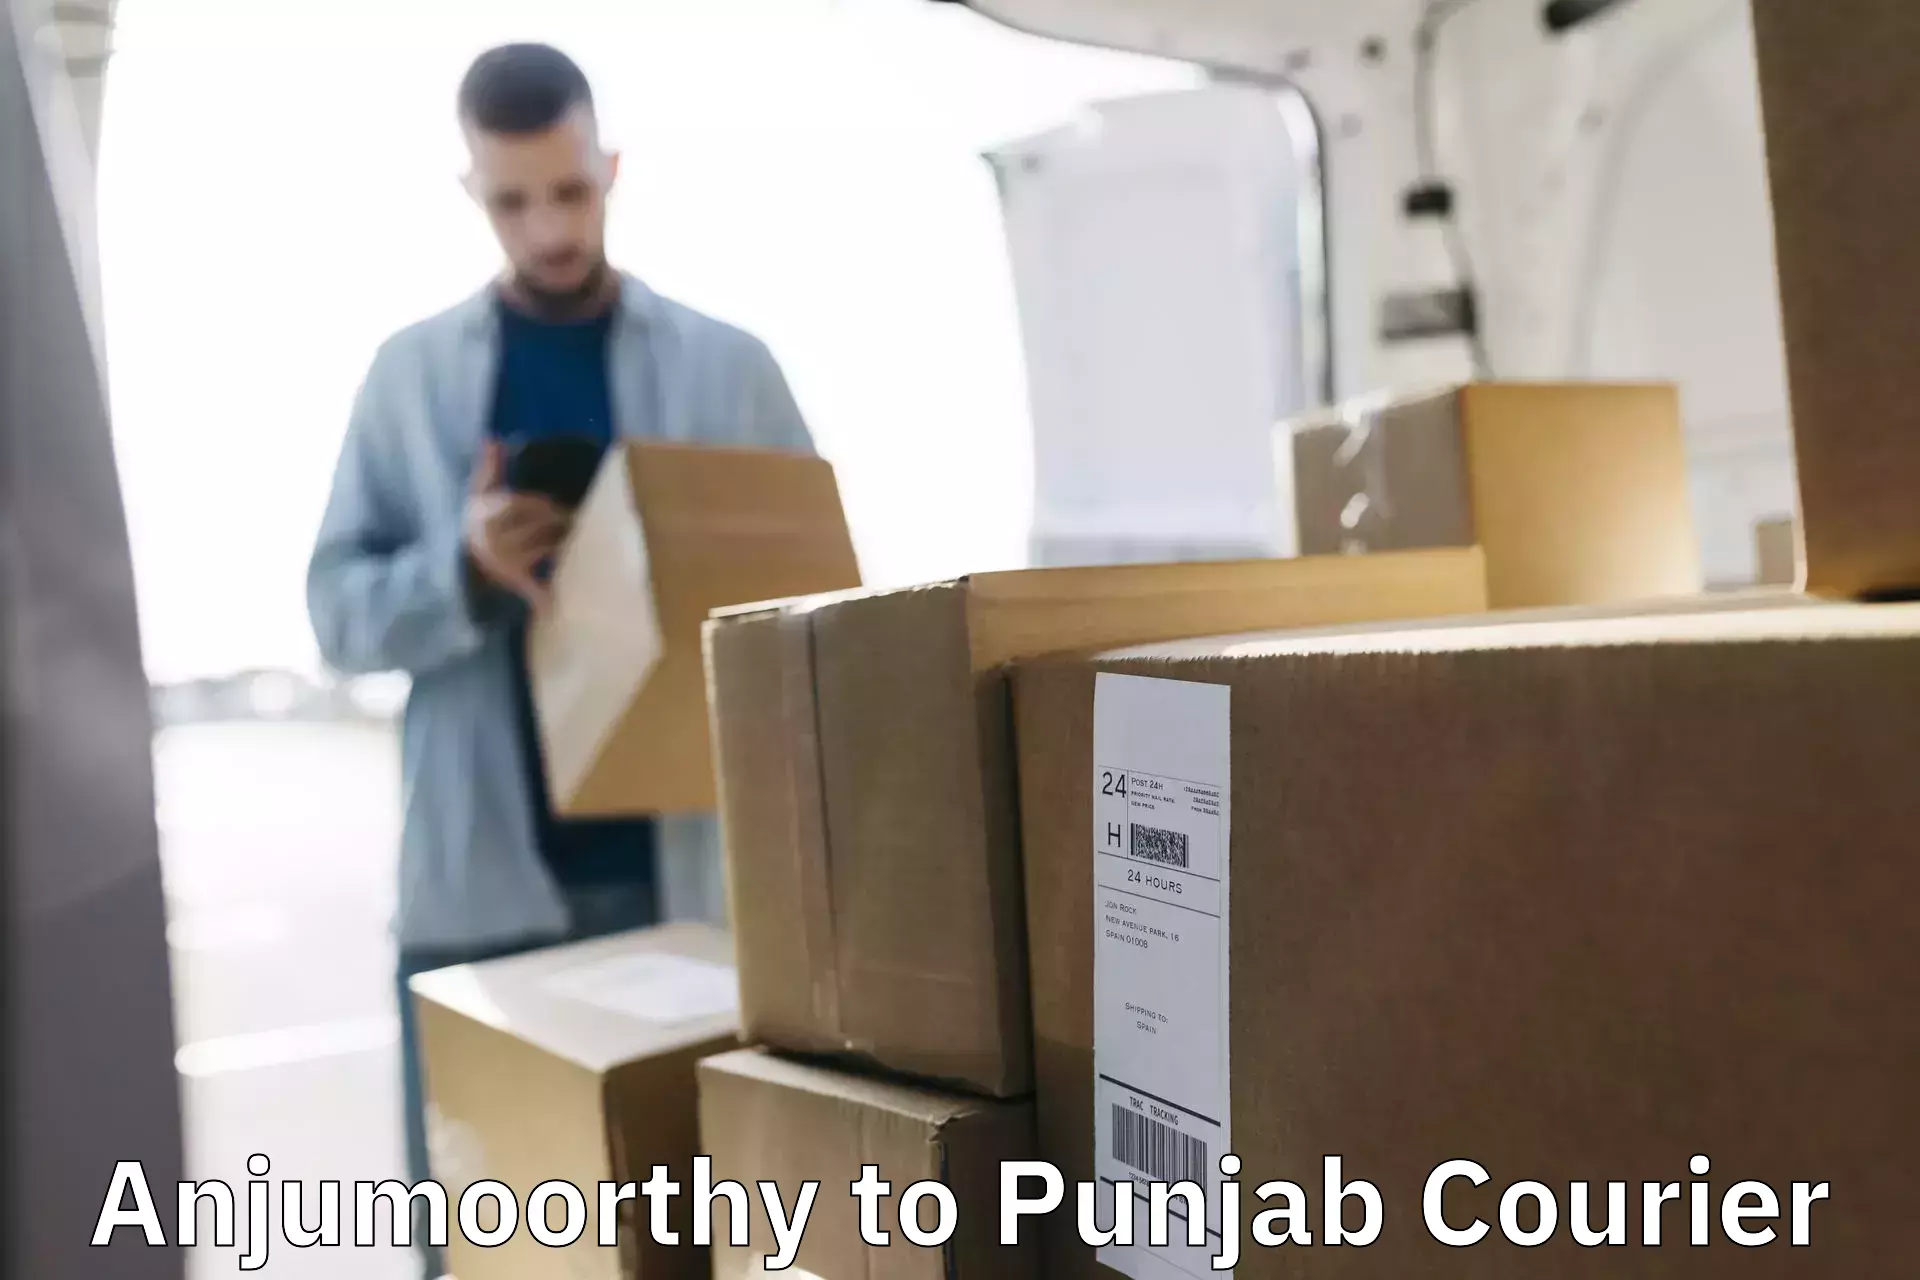 Round-the-clock parcel delivery Anjumoorthy to Sultanpur Lodhi